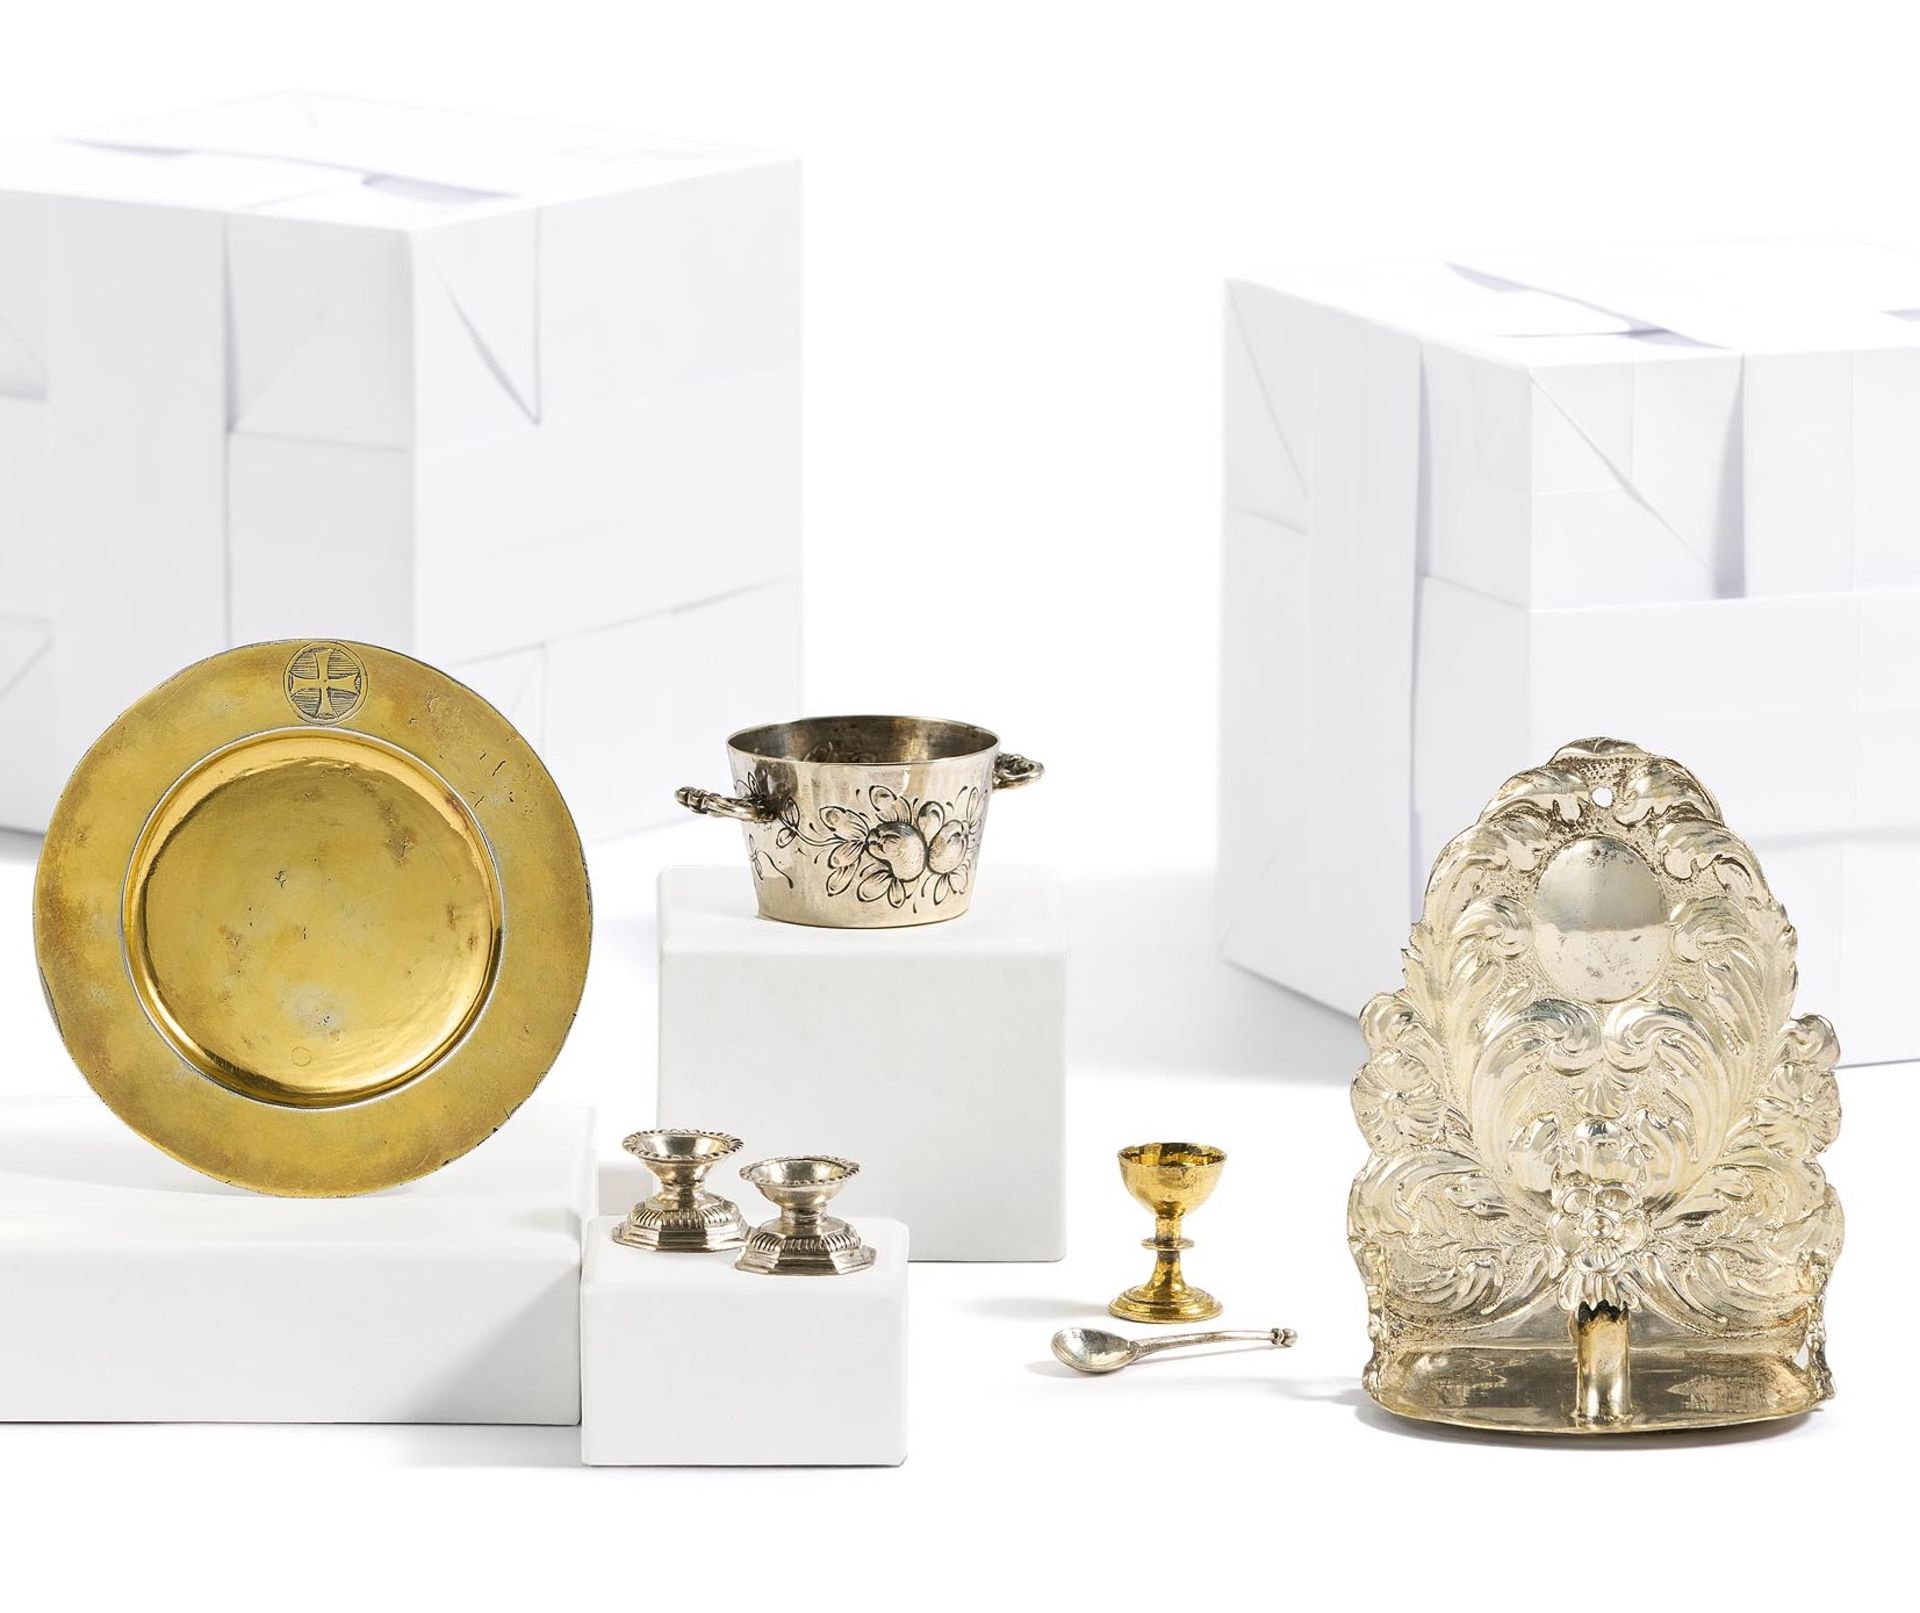 Germany: ENSEMBLE OF SIX SILVER MINIATURE OBJECTS